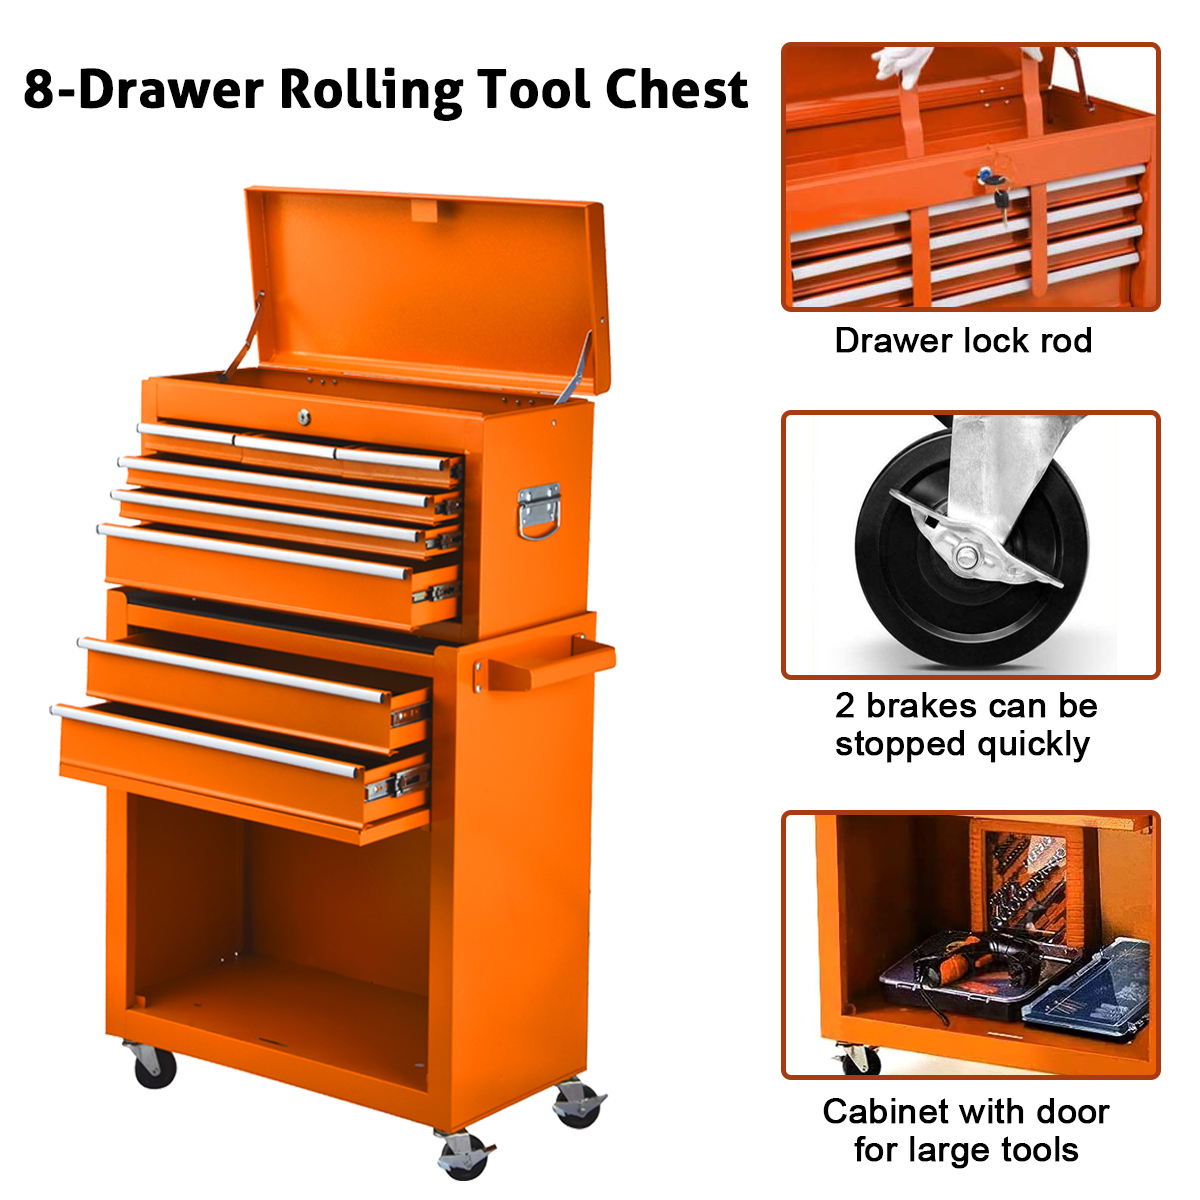 8-Drawer Tool Chest with Wheels, Tool Storage Cabinet and Tool Box, Lockable Rolling Tool Chest with Drawers, Toolbox Organizer for Garage Warehouse Workshop (Orange) - image 4 of 8